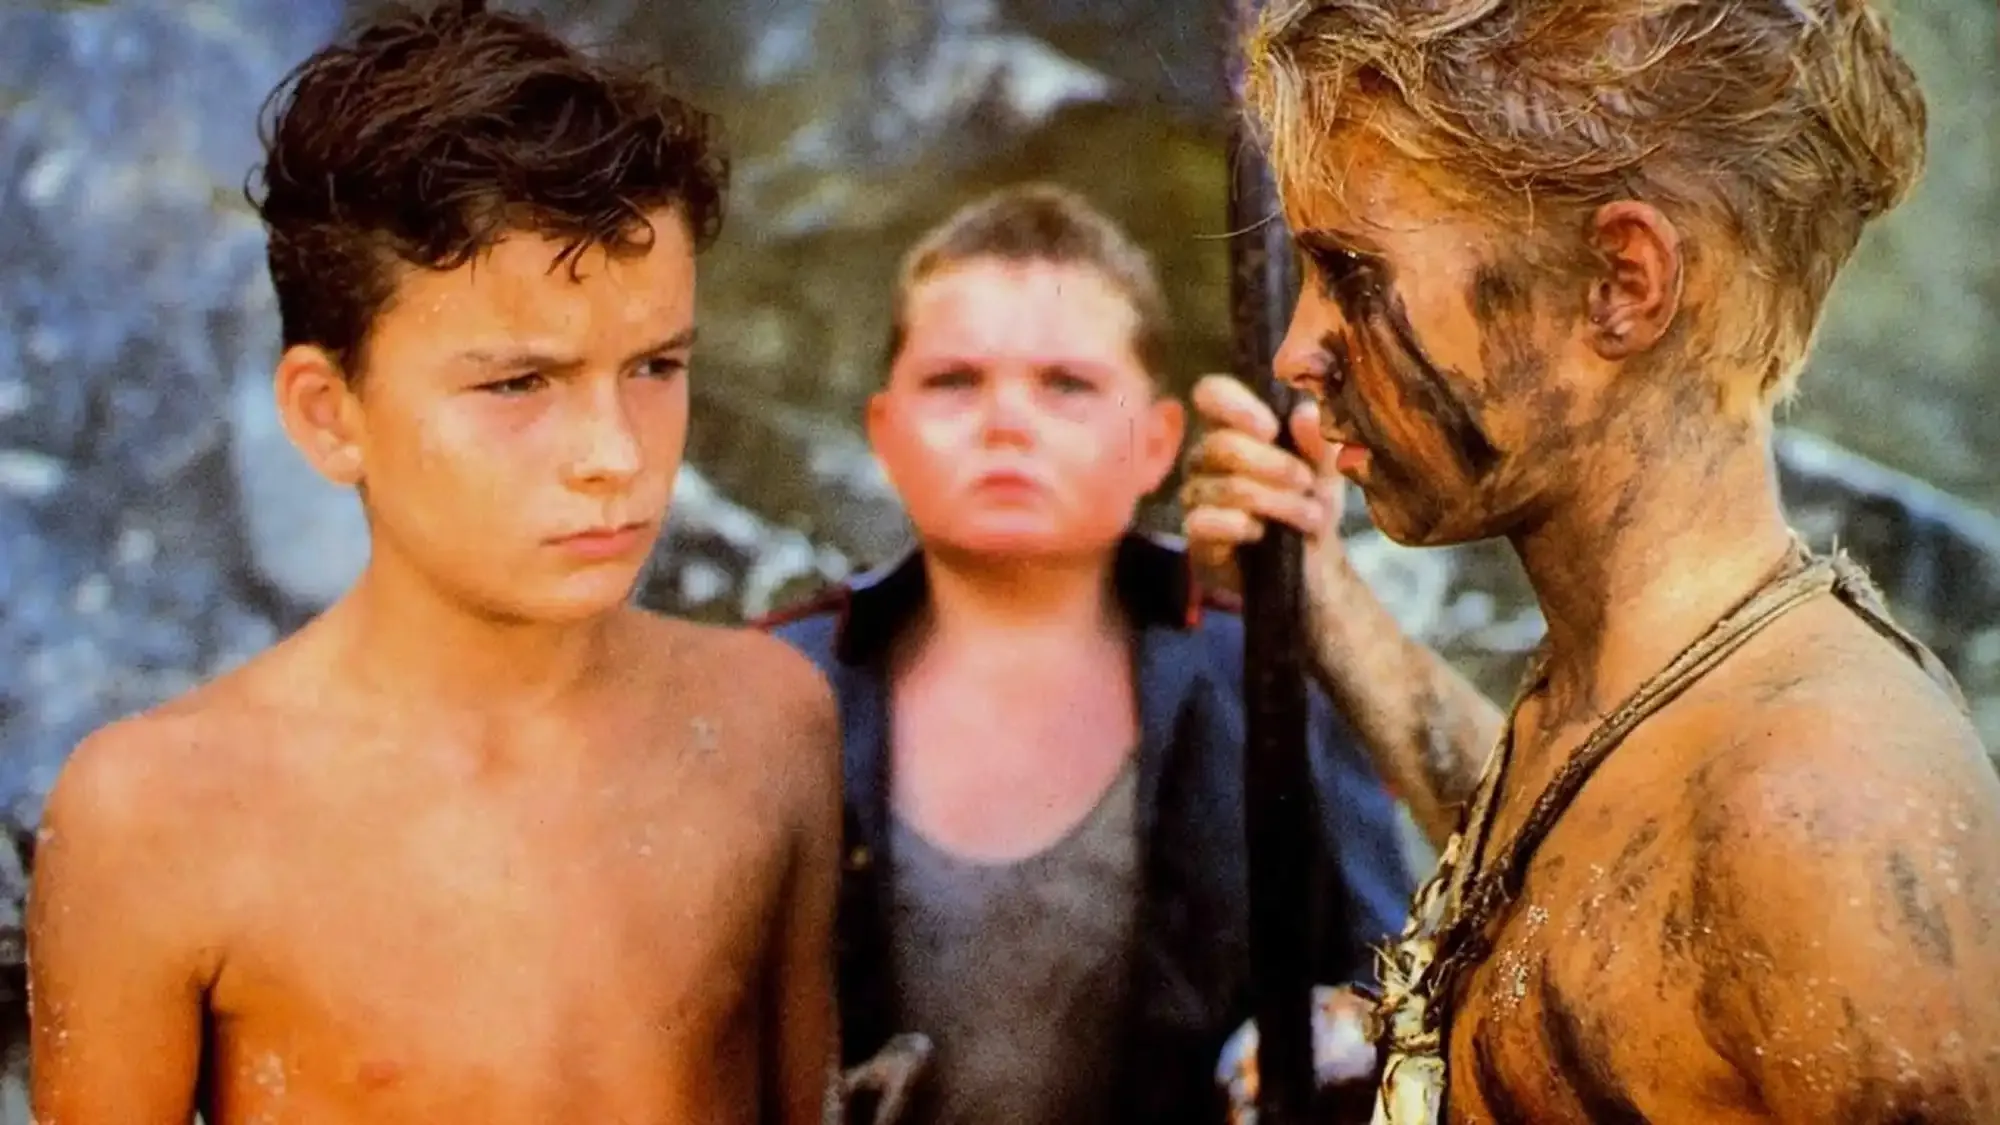 Lord of the Flies movie review